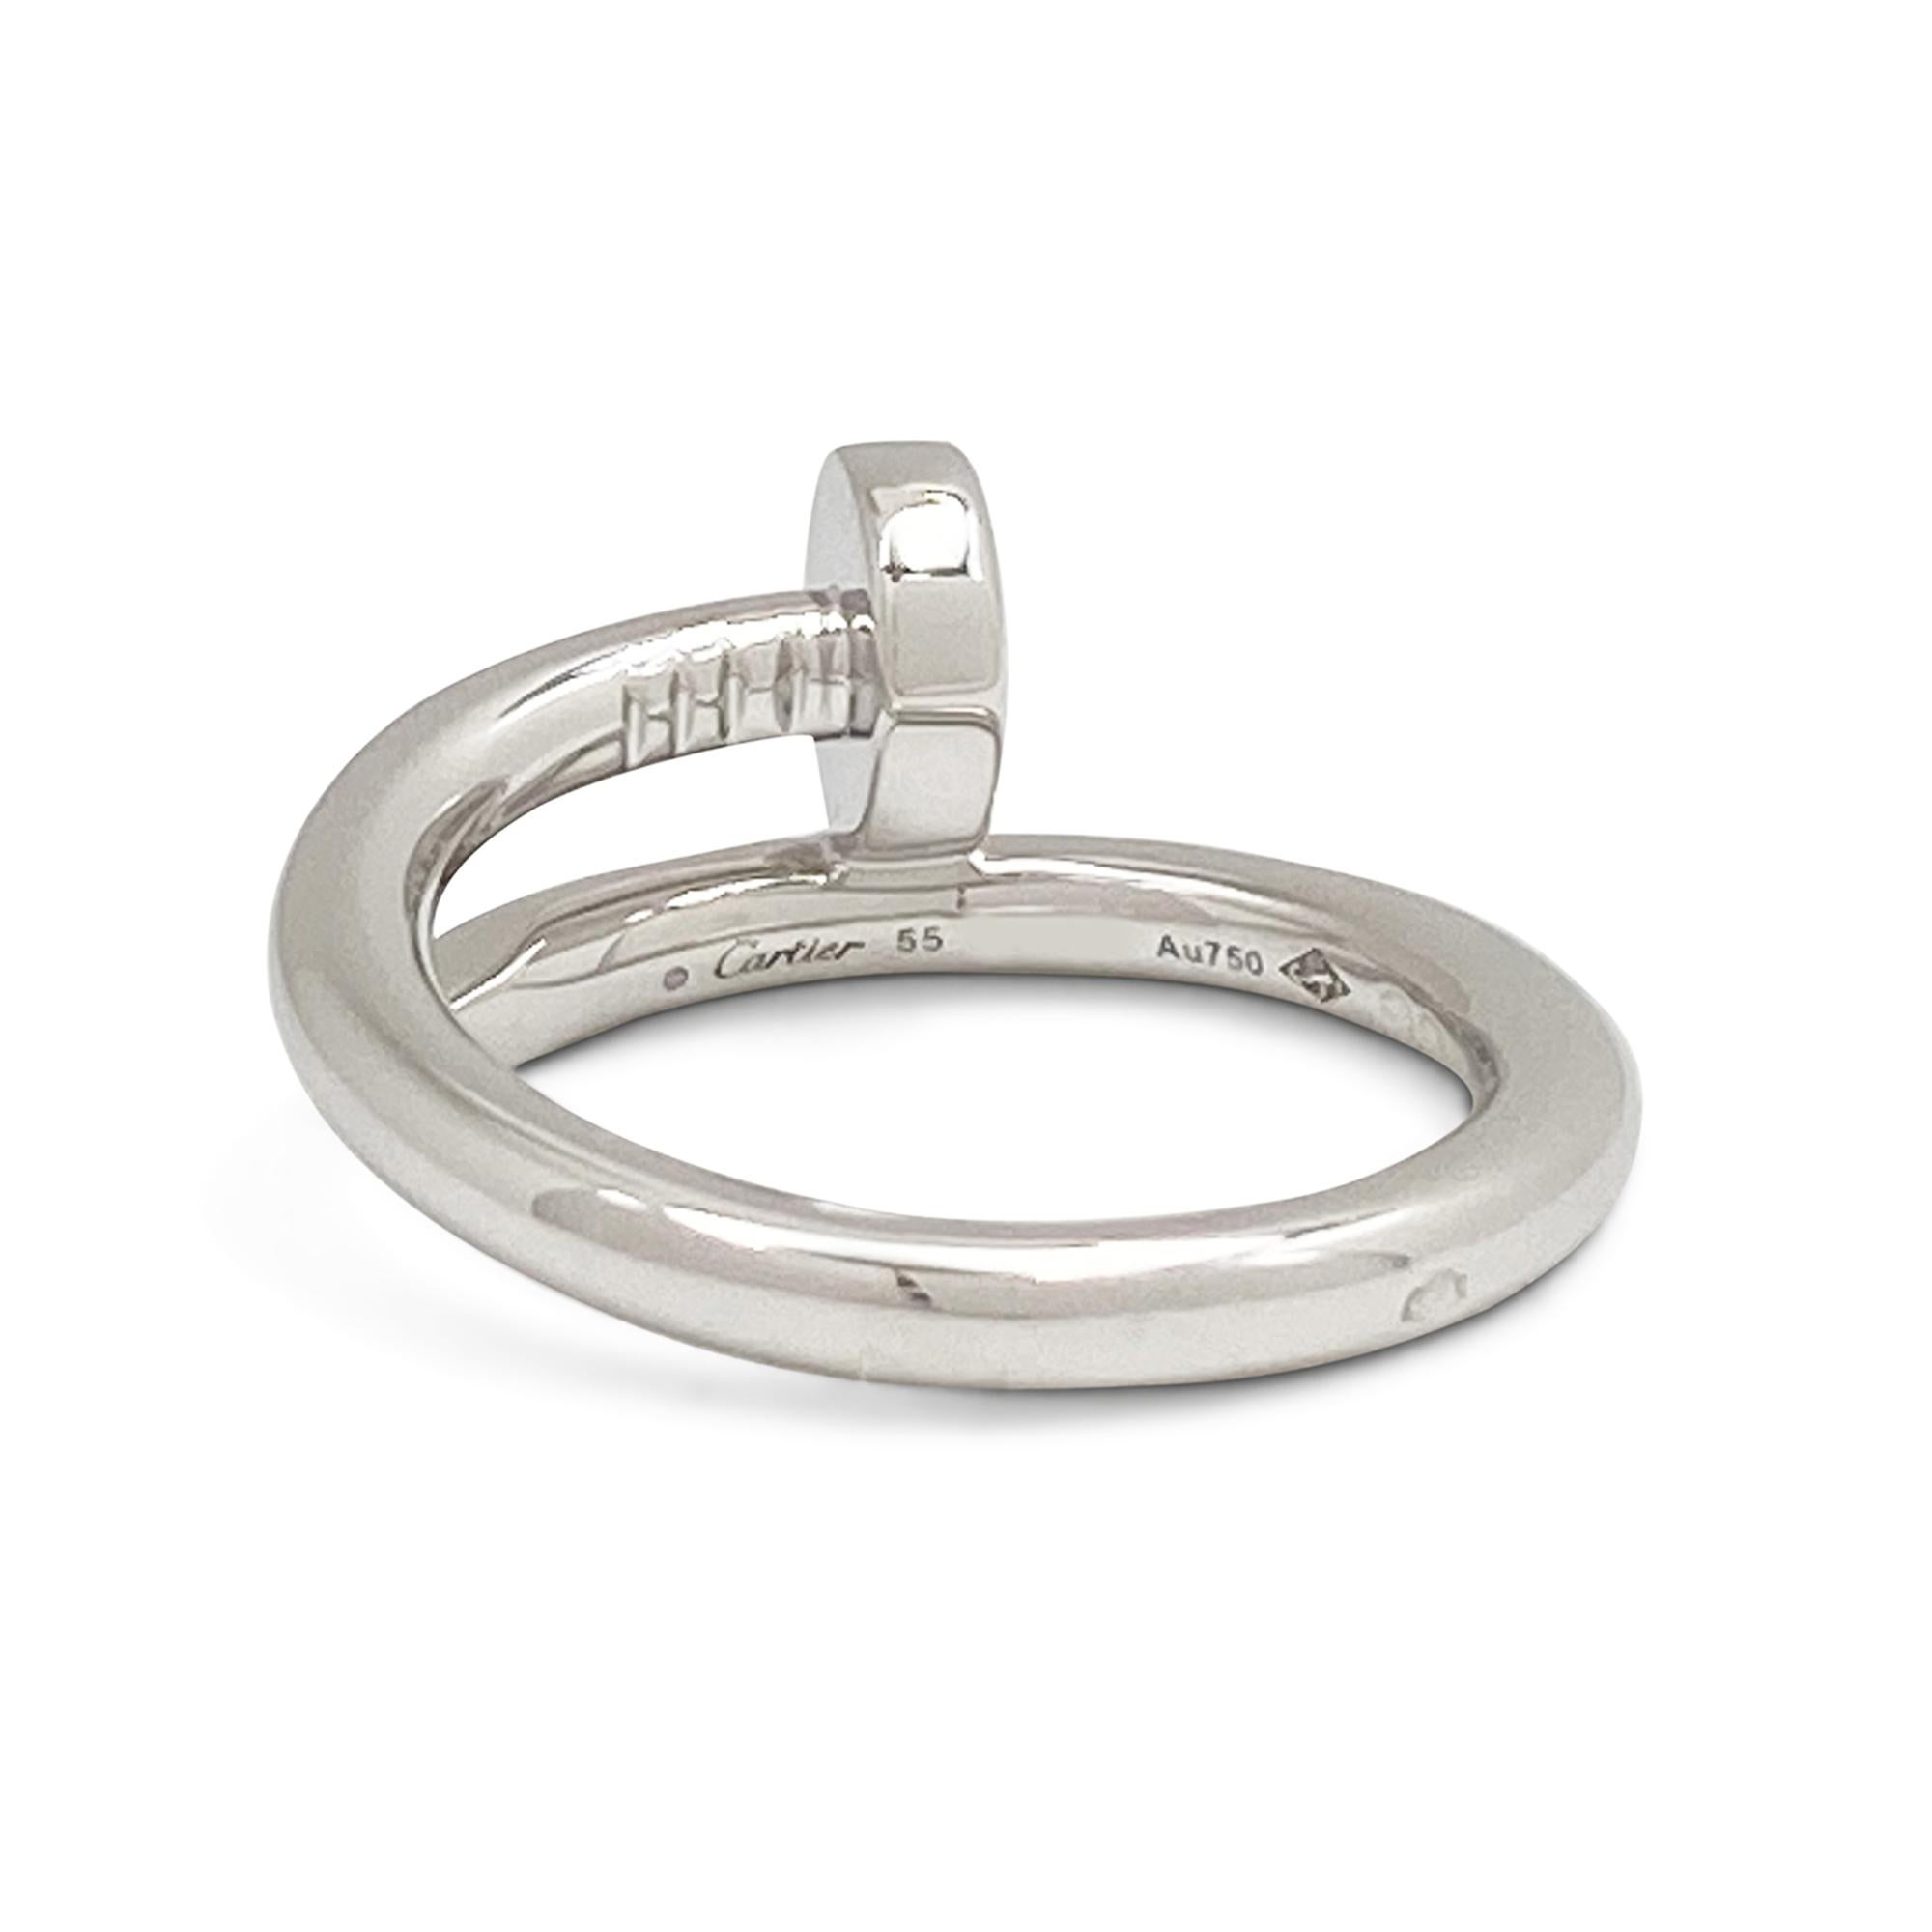 Designed as a 'just a nail', this authentic Cartier 'Juste un Clou' ring is modern, transcending the everyday, yet bold. The nail ring is an innovative twist on a familiar and ordinary object. Signed Cartier, 55, Au750, with serial number. Size 55